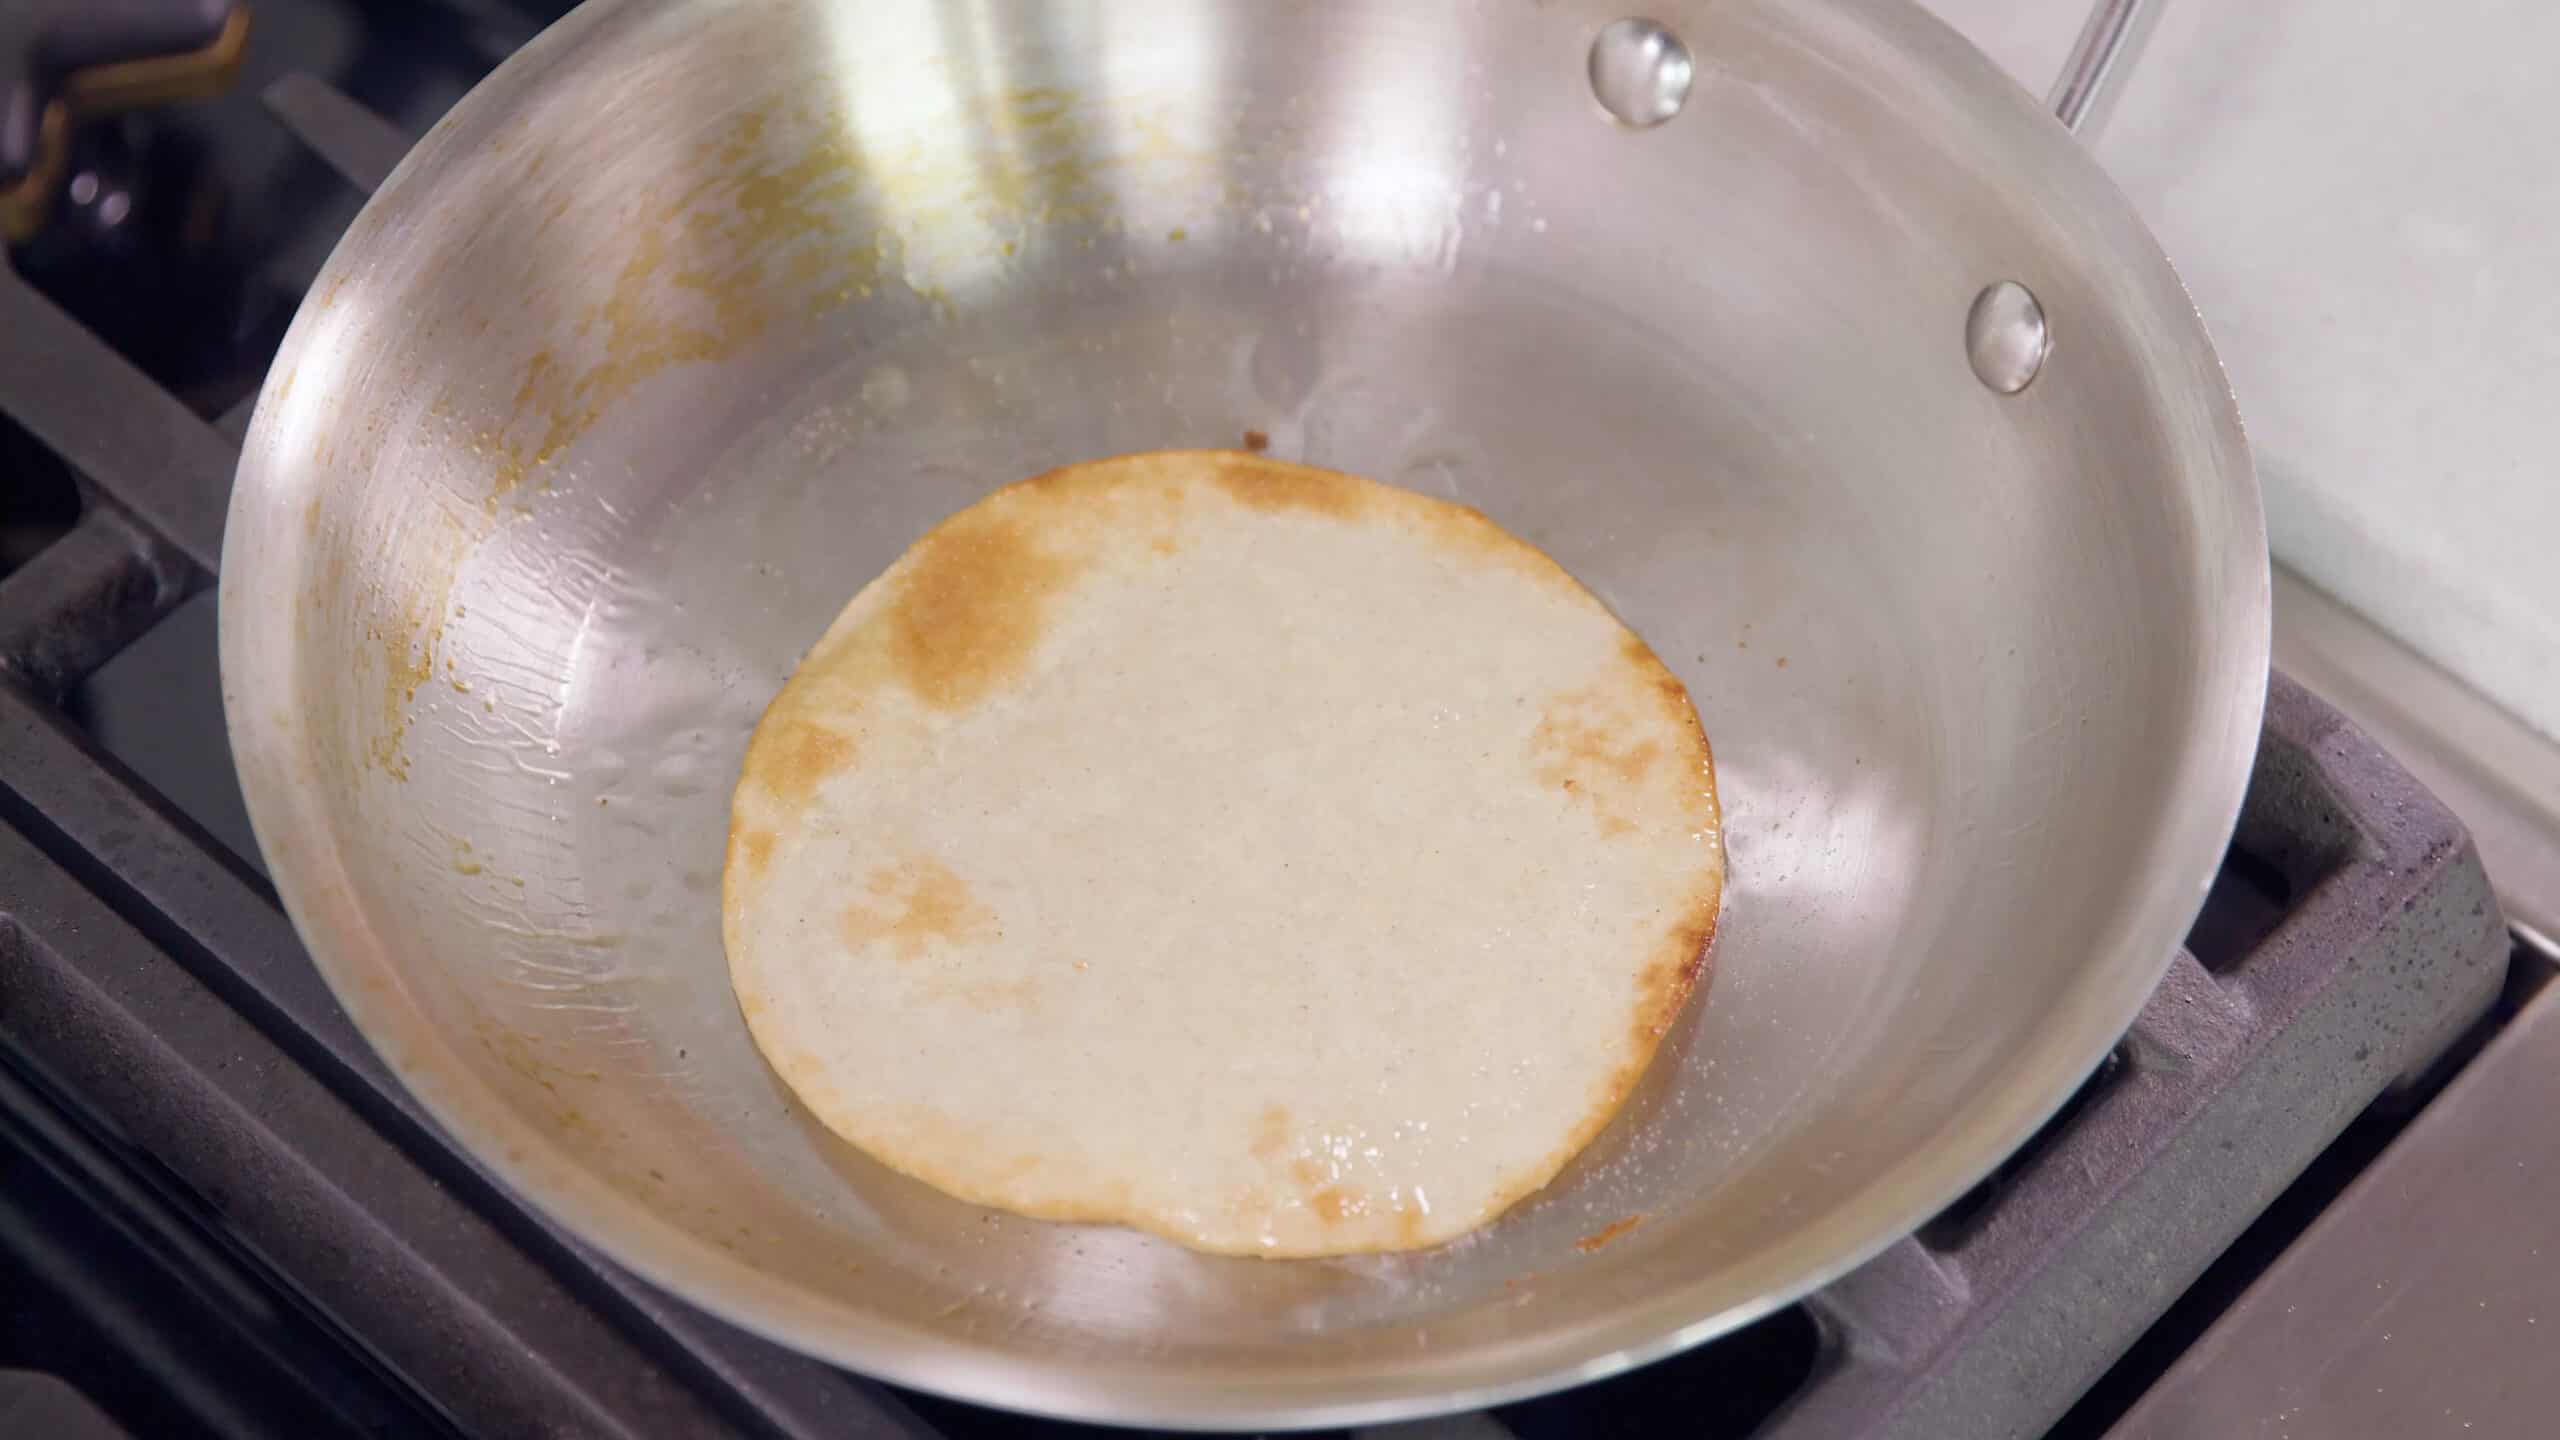 Overhead view of metal saucepan with piping hot oil and a single tortilla frying in the pan.